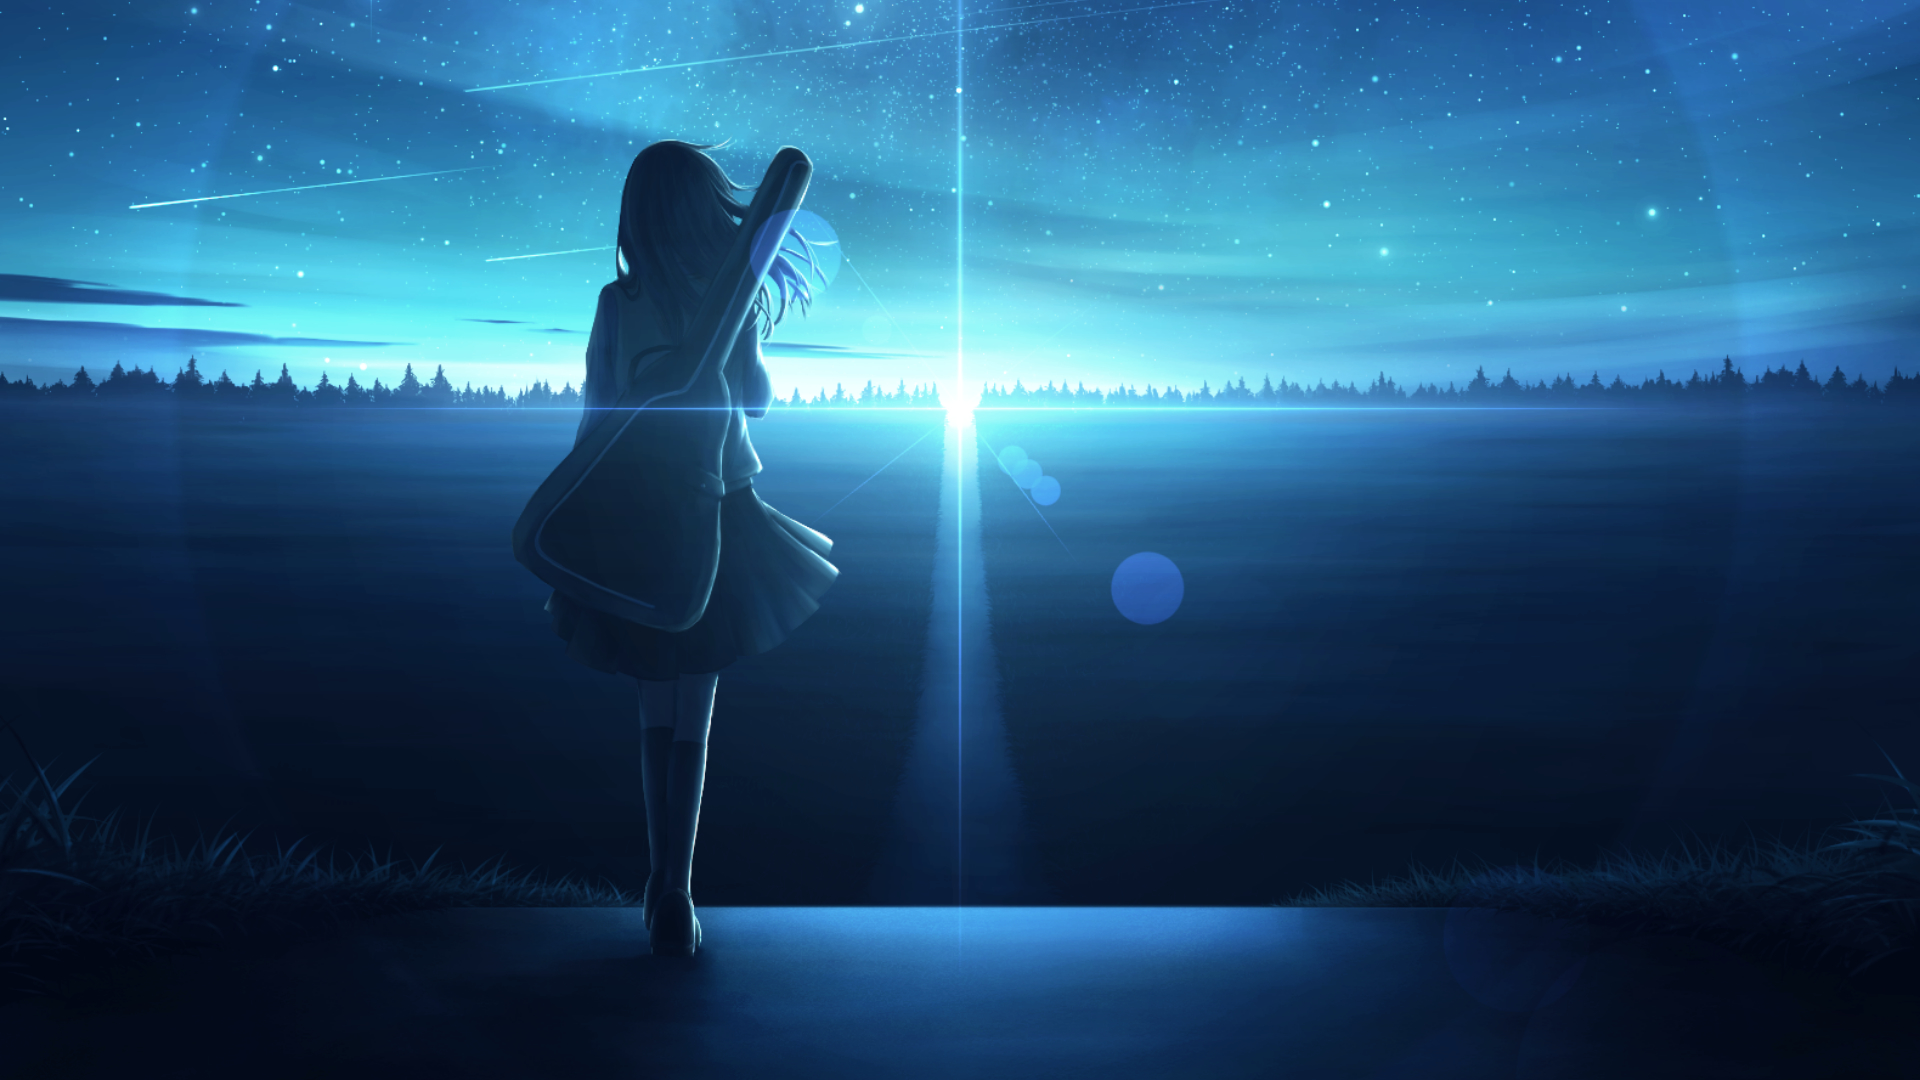 3840x2160202199 Lonely Anime Girl in Sunset 3840x2160202199 Resolution